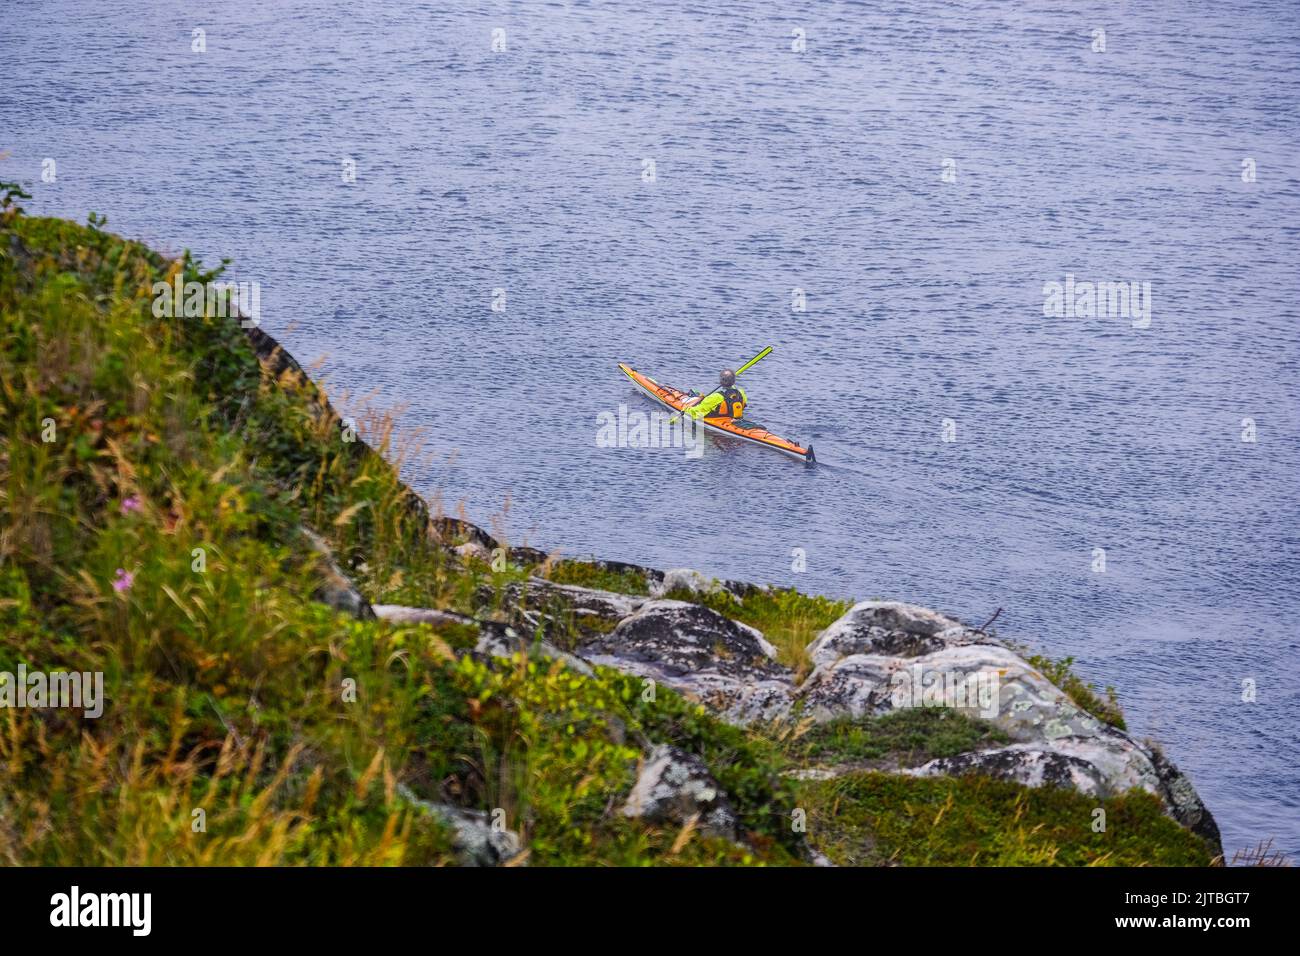 Sea kayaker off Pointe Noire, Baie St-Catherine, Quebec, Canada. Stock Photo